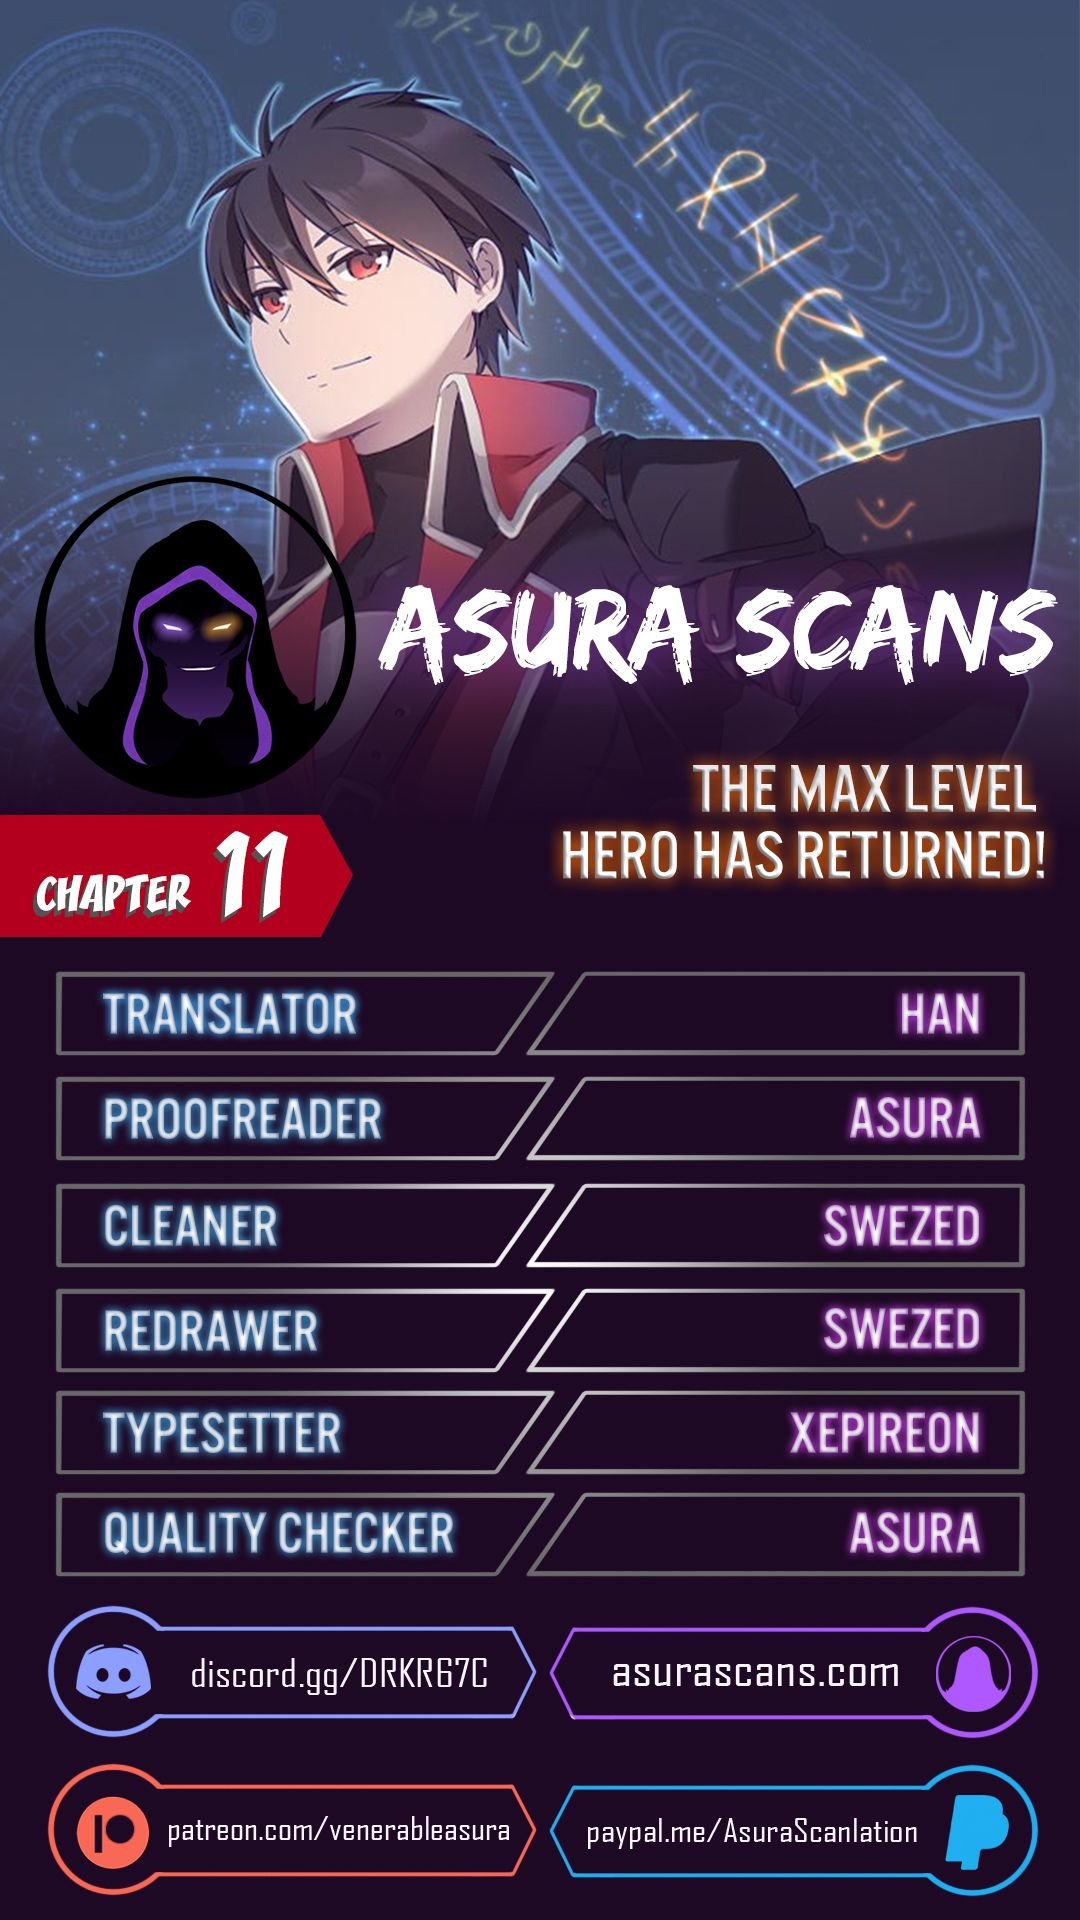 The MAX leveled hero will return! Chapter 11